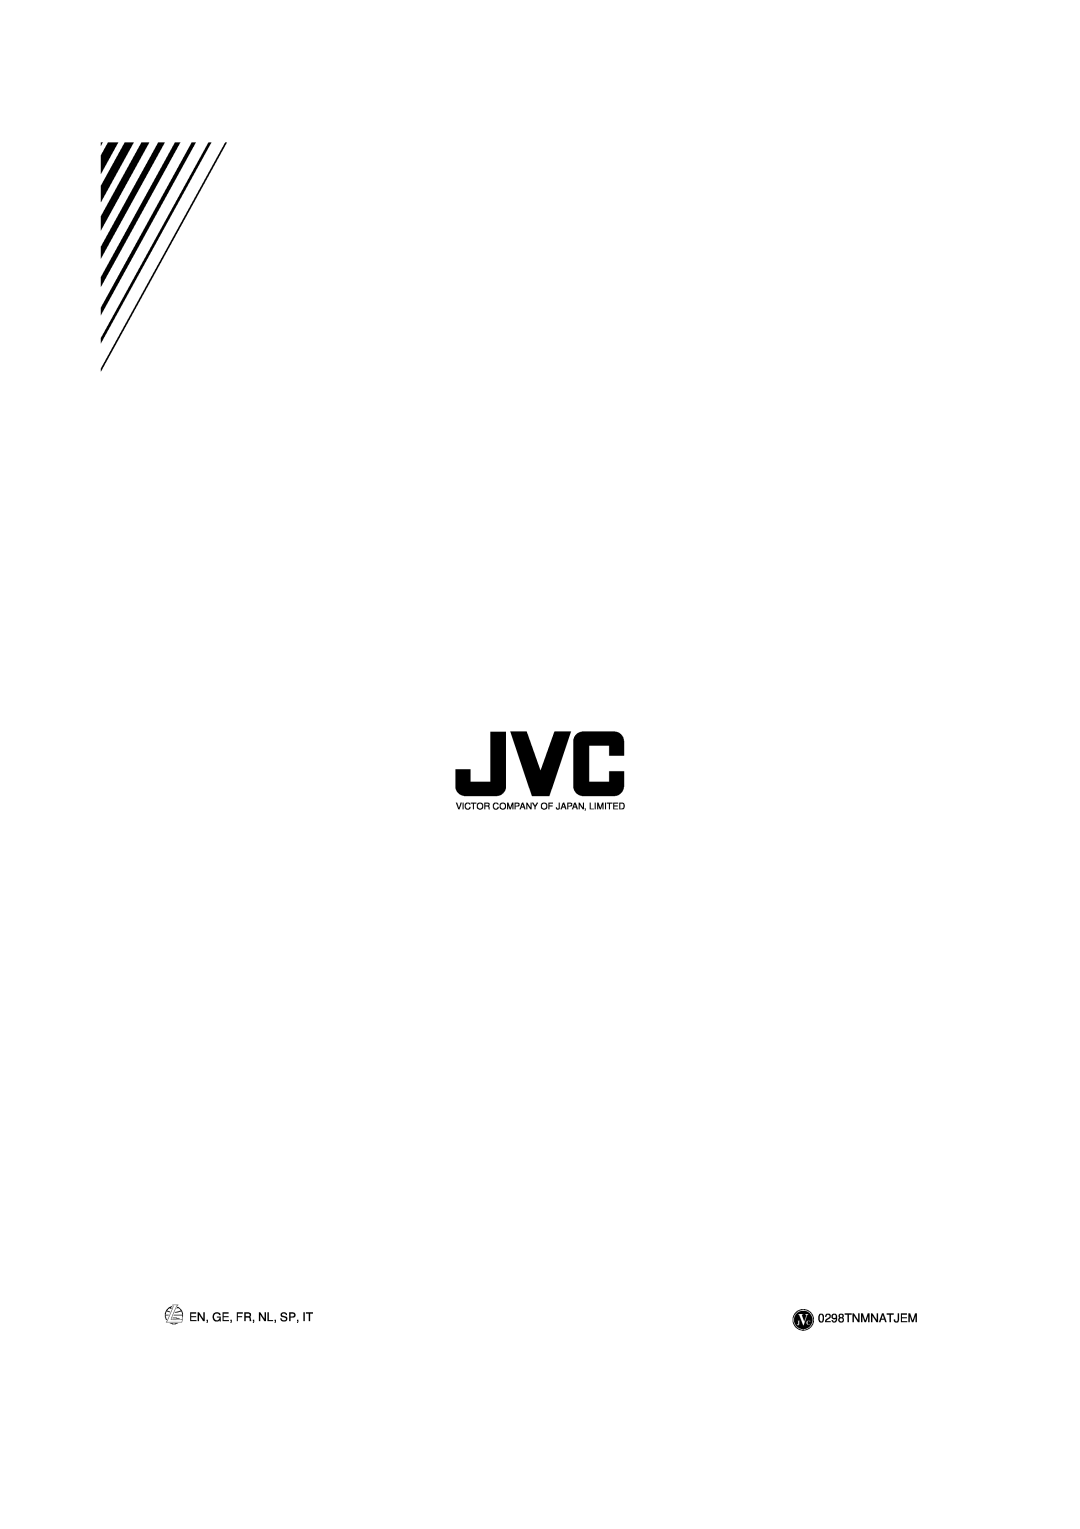 JVC CA-D302T, CA-D352TR manual En, Ge, Fr, Nl, Sp, It, 0298TNMNATJEM, Victor Company Of Japan, Limited 